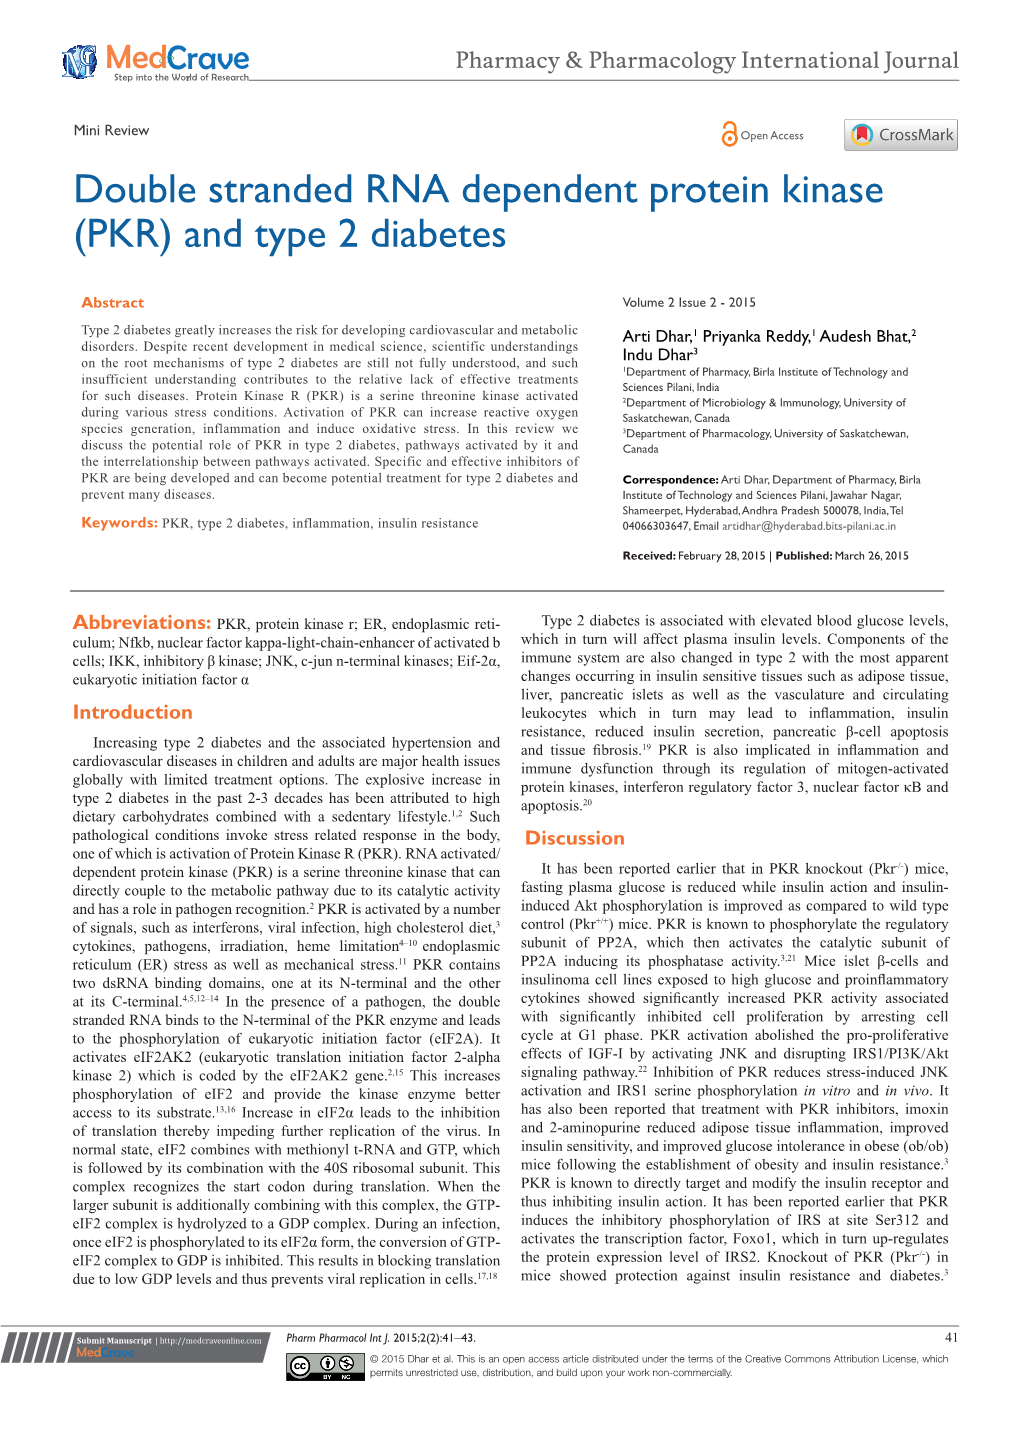 Double Stranded RNA Dependent Protein Kinase (PKR) and Type 2 Diabetes